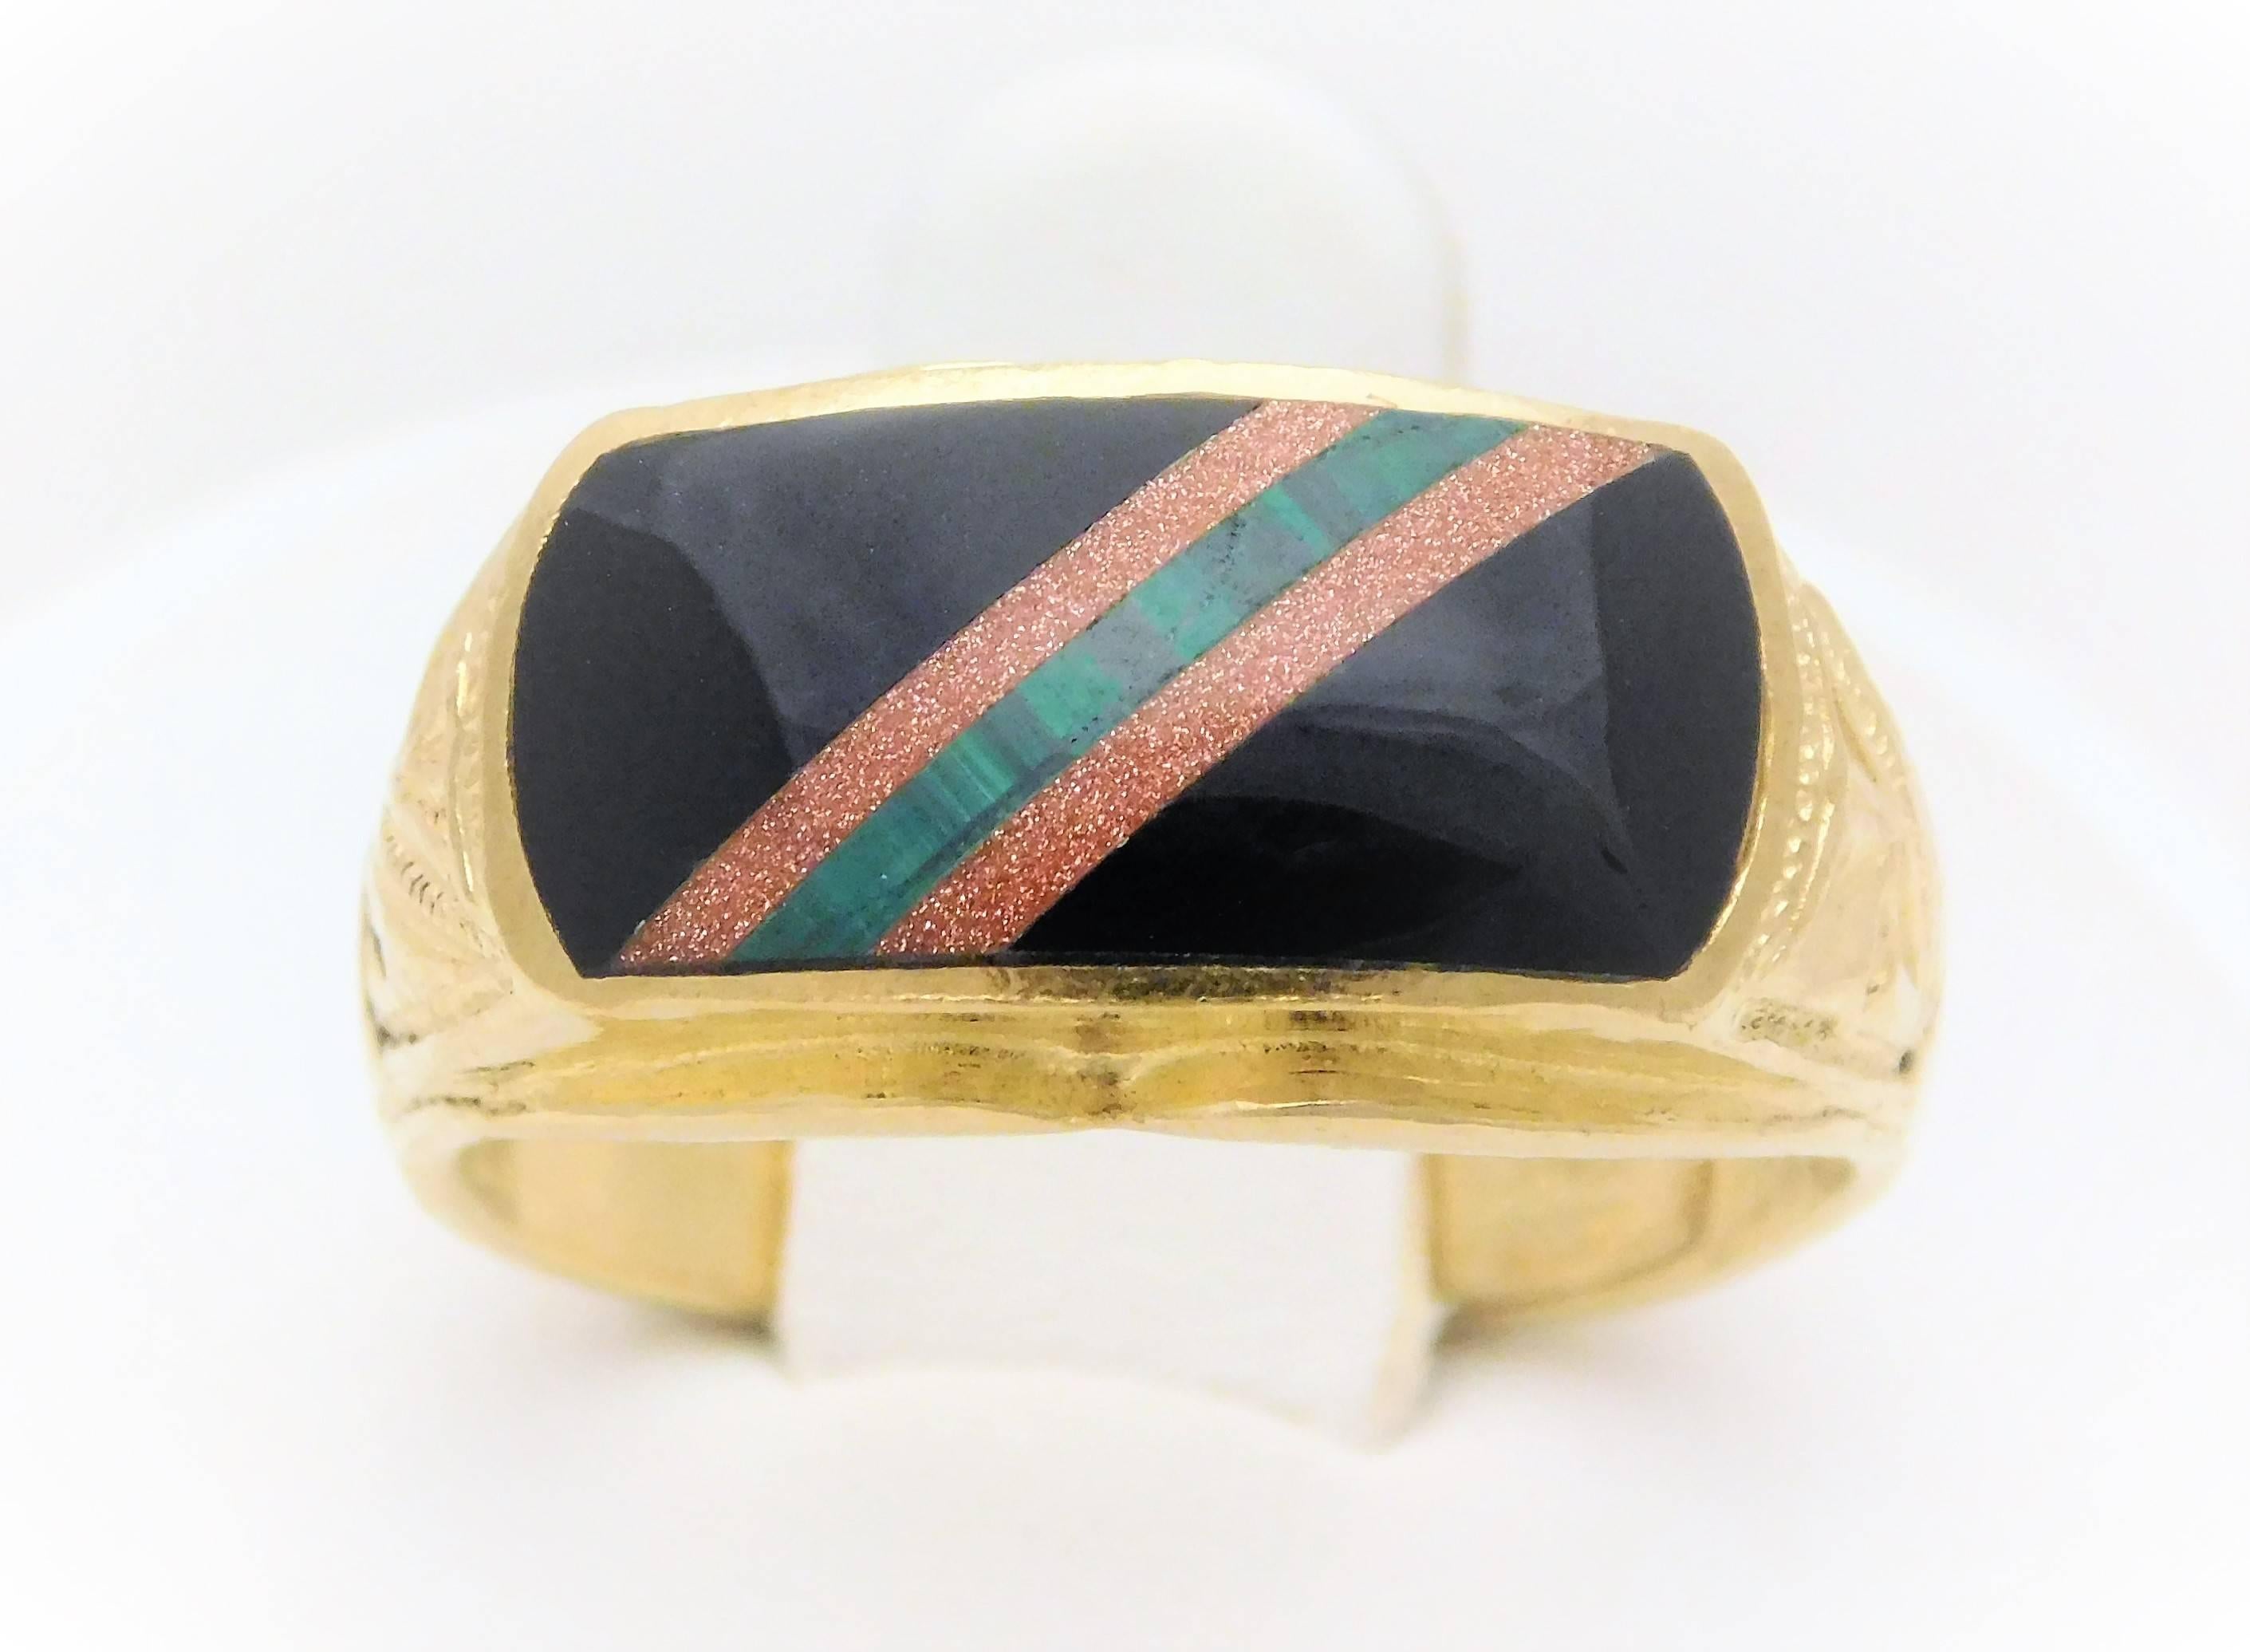 From a Chinese estate.  Circa 1940-1960.  This magnificent ring has been hand crafted in solid 23k yellow gold.  It has been masterfully jeweled with a very unique handmade black onyx cabochon.  By using heat and pressure, this stacked cabochon is